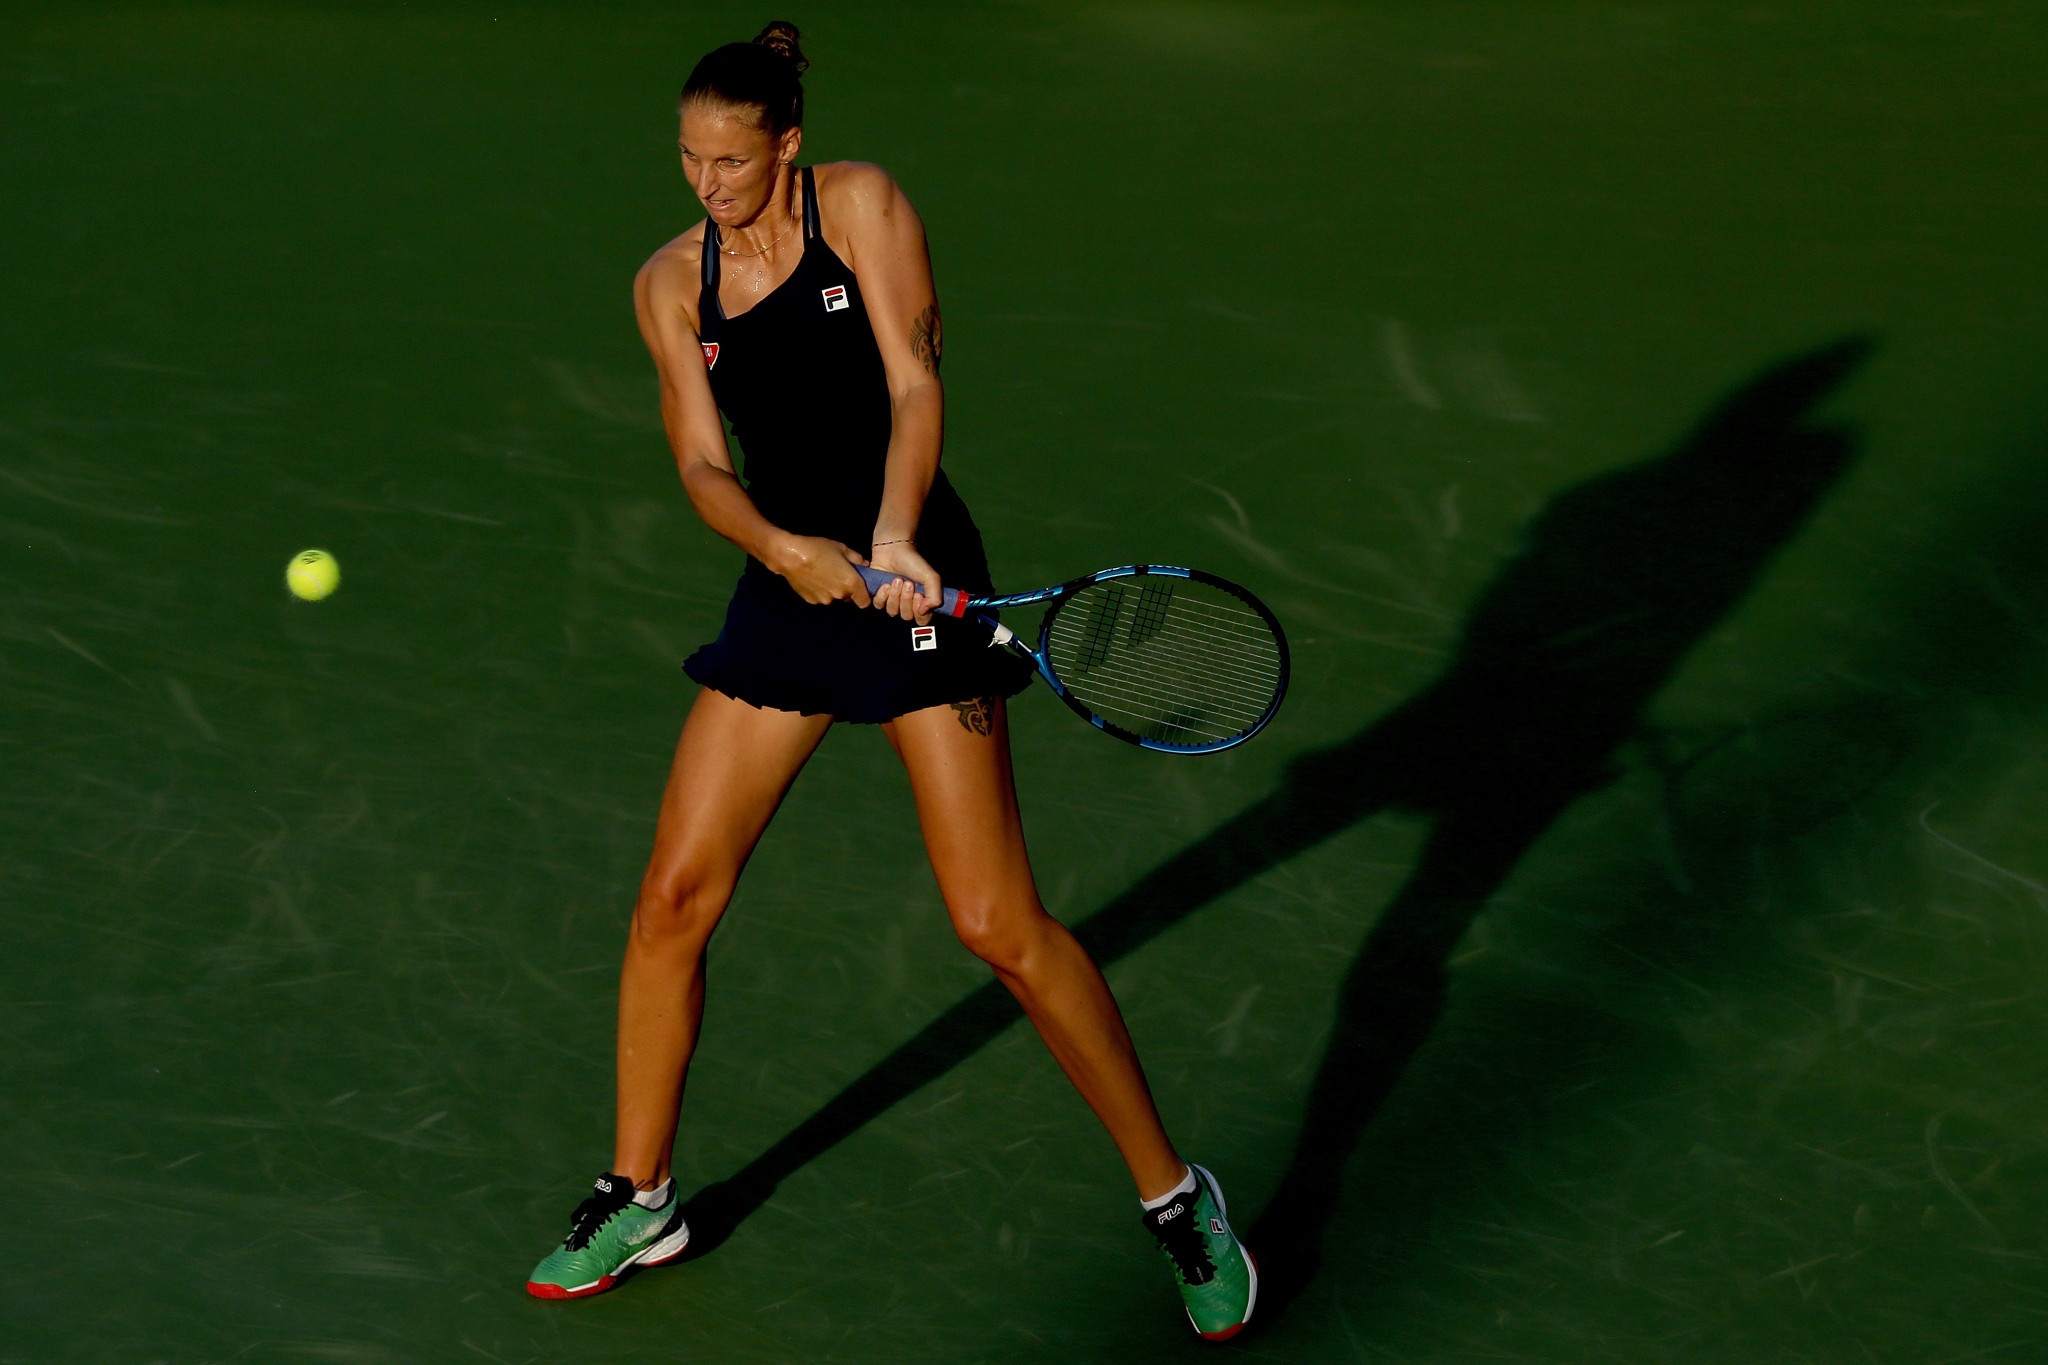 Women's top seed Karolina Pliskova suffered a surprise defeat in her first match at the Cincinnati Masters ©Getty Images